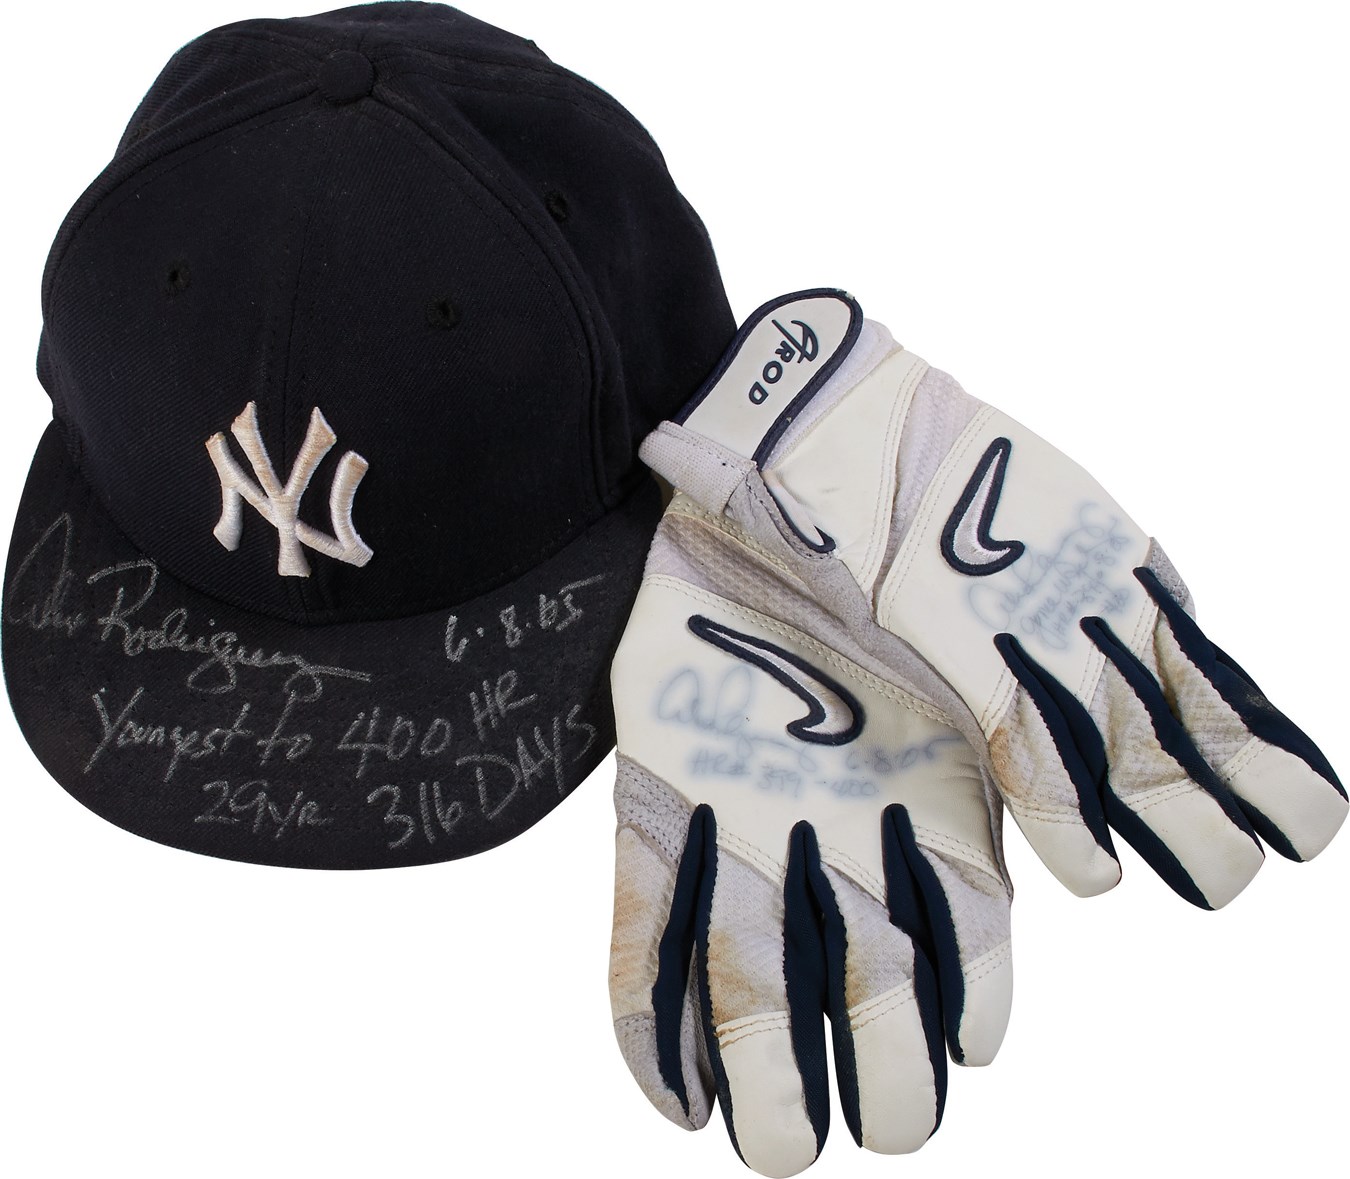 Baseball Equipment - 2005 Alex Rodriguez HR #400 Signed Game Worn Cap & Batting Gloves - Youngest Player Ever (Photomatched & A-Rod LOA)